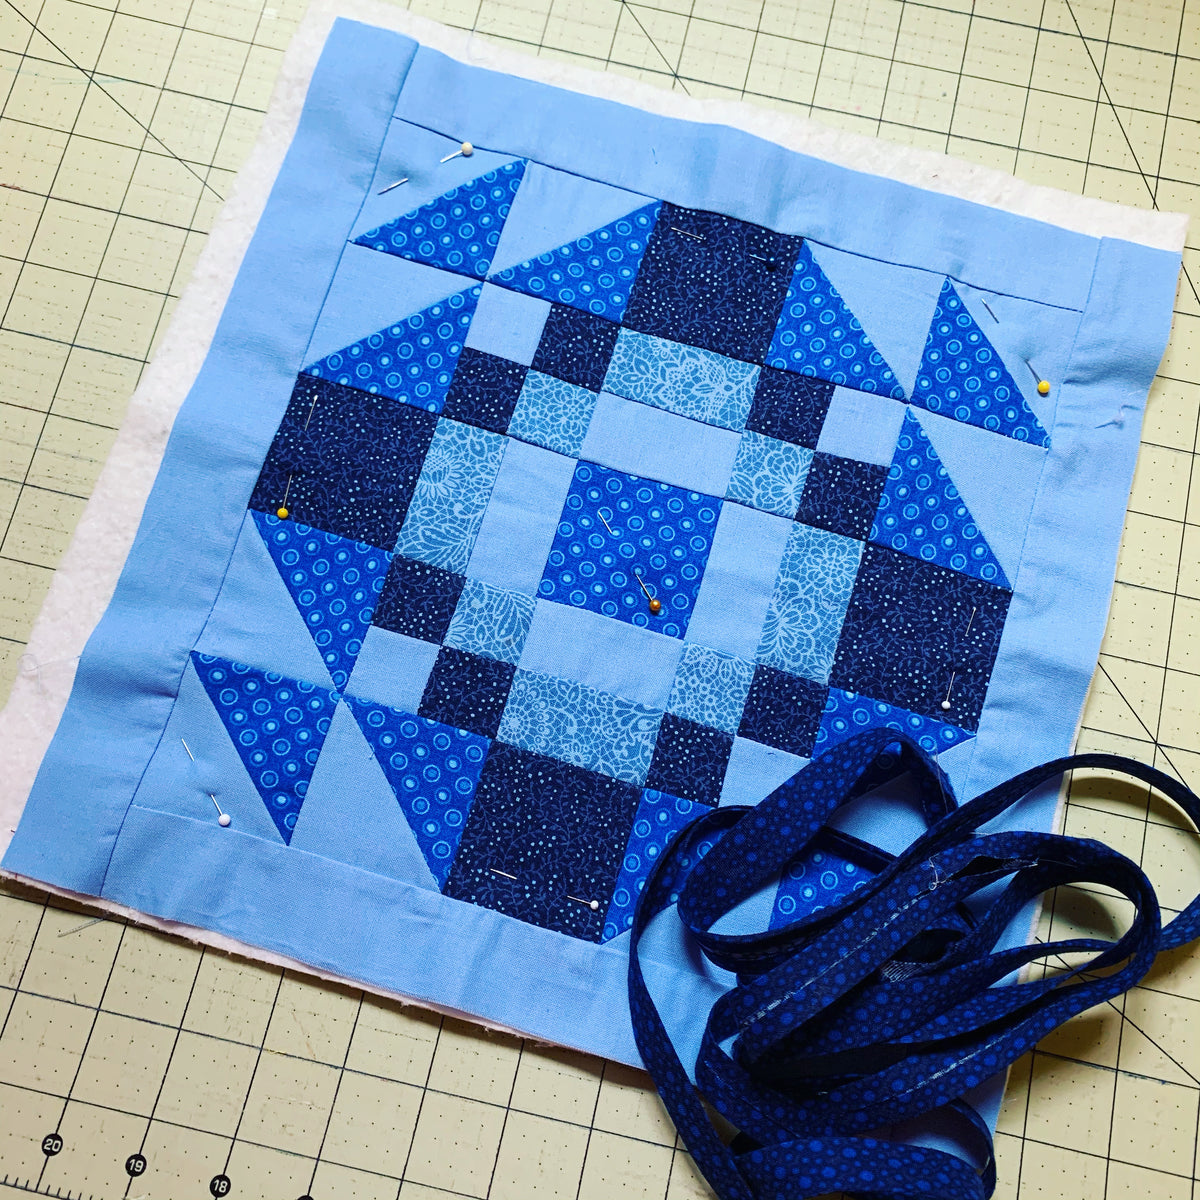 How to Sew Squares Together for Quilting or Patchwork - Bethany